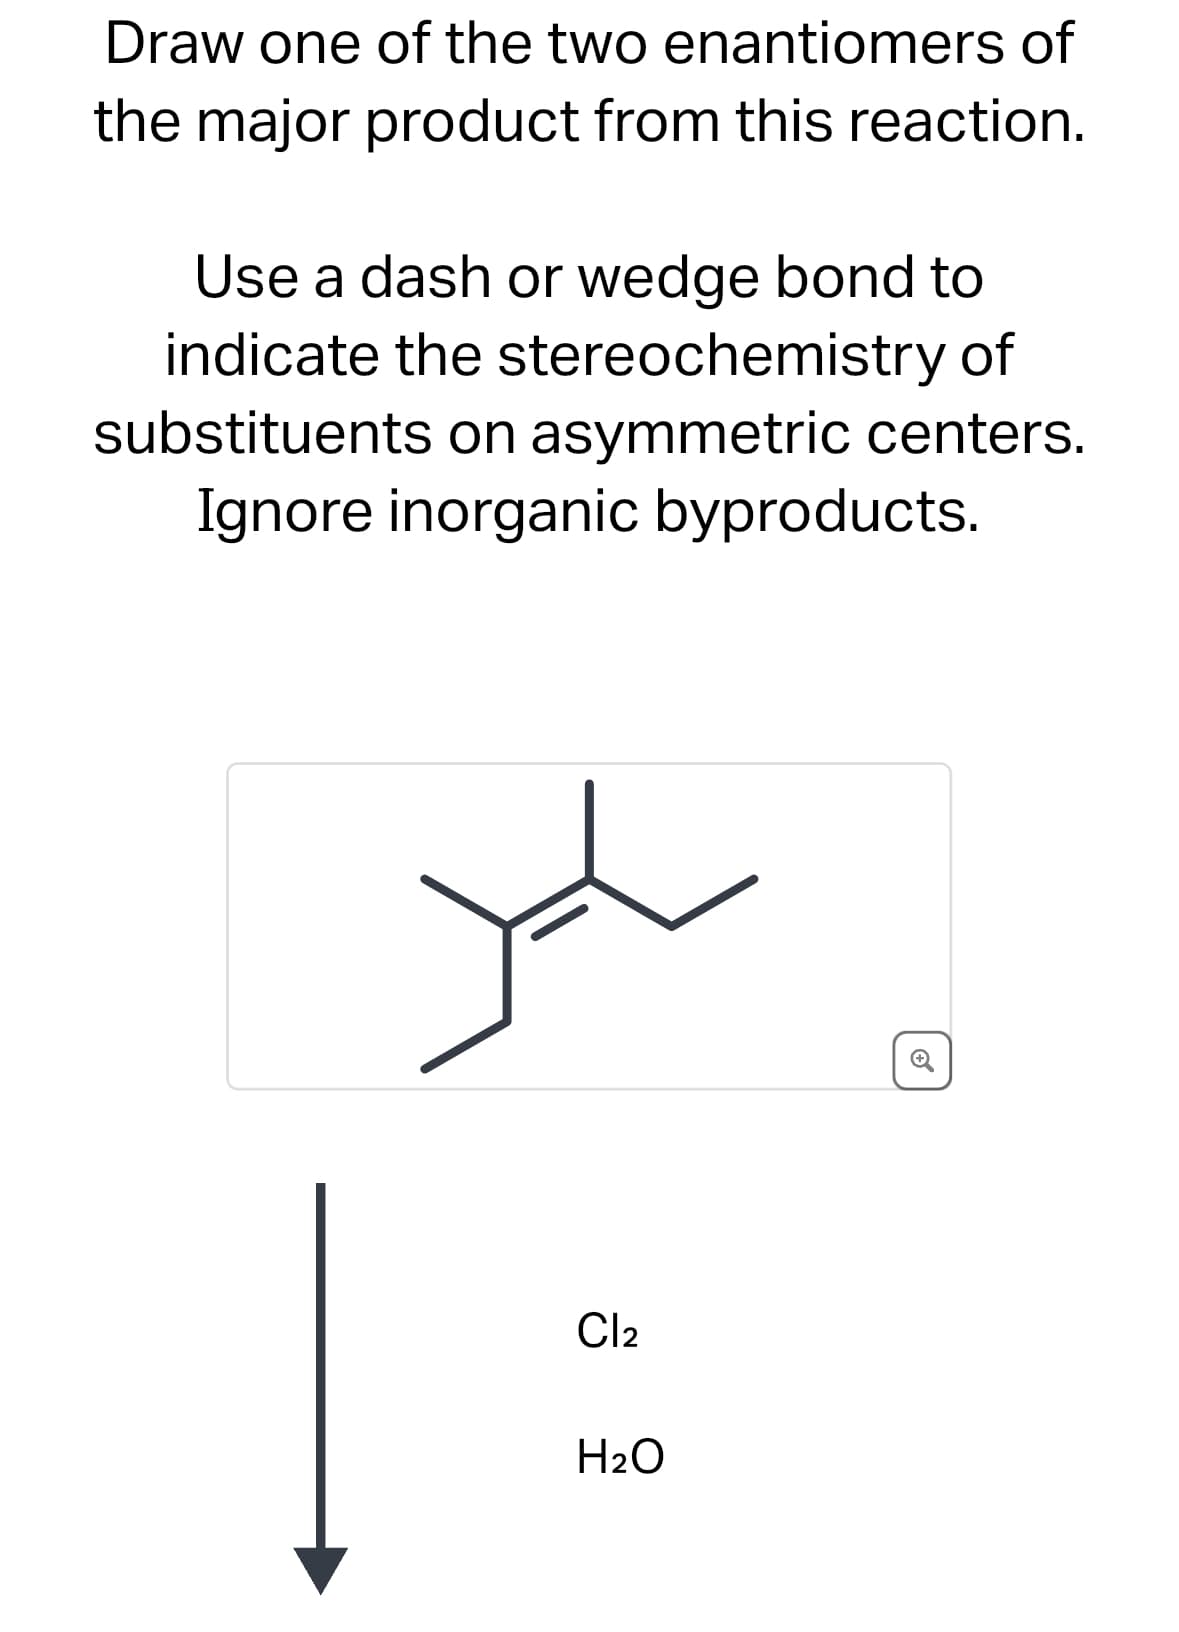 Draw one of the two enantiomers of
the major product from this reaction.
Use a dash or wedge bond to
indicate the stereochemistry of
substituents on asymmetric centers.
Ignore inorganic byproducts.
Cl2
H2O